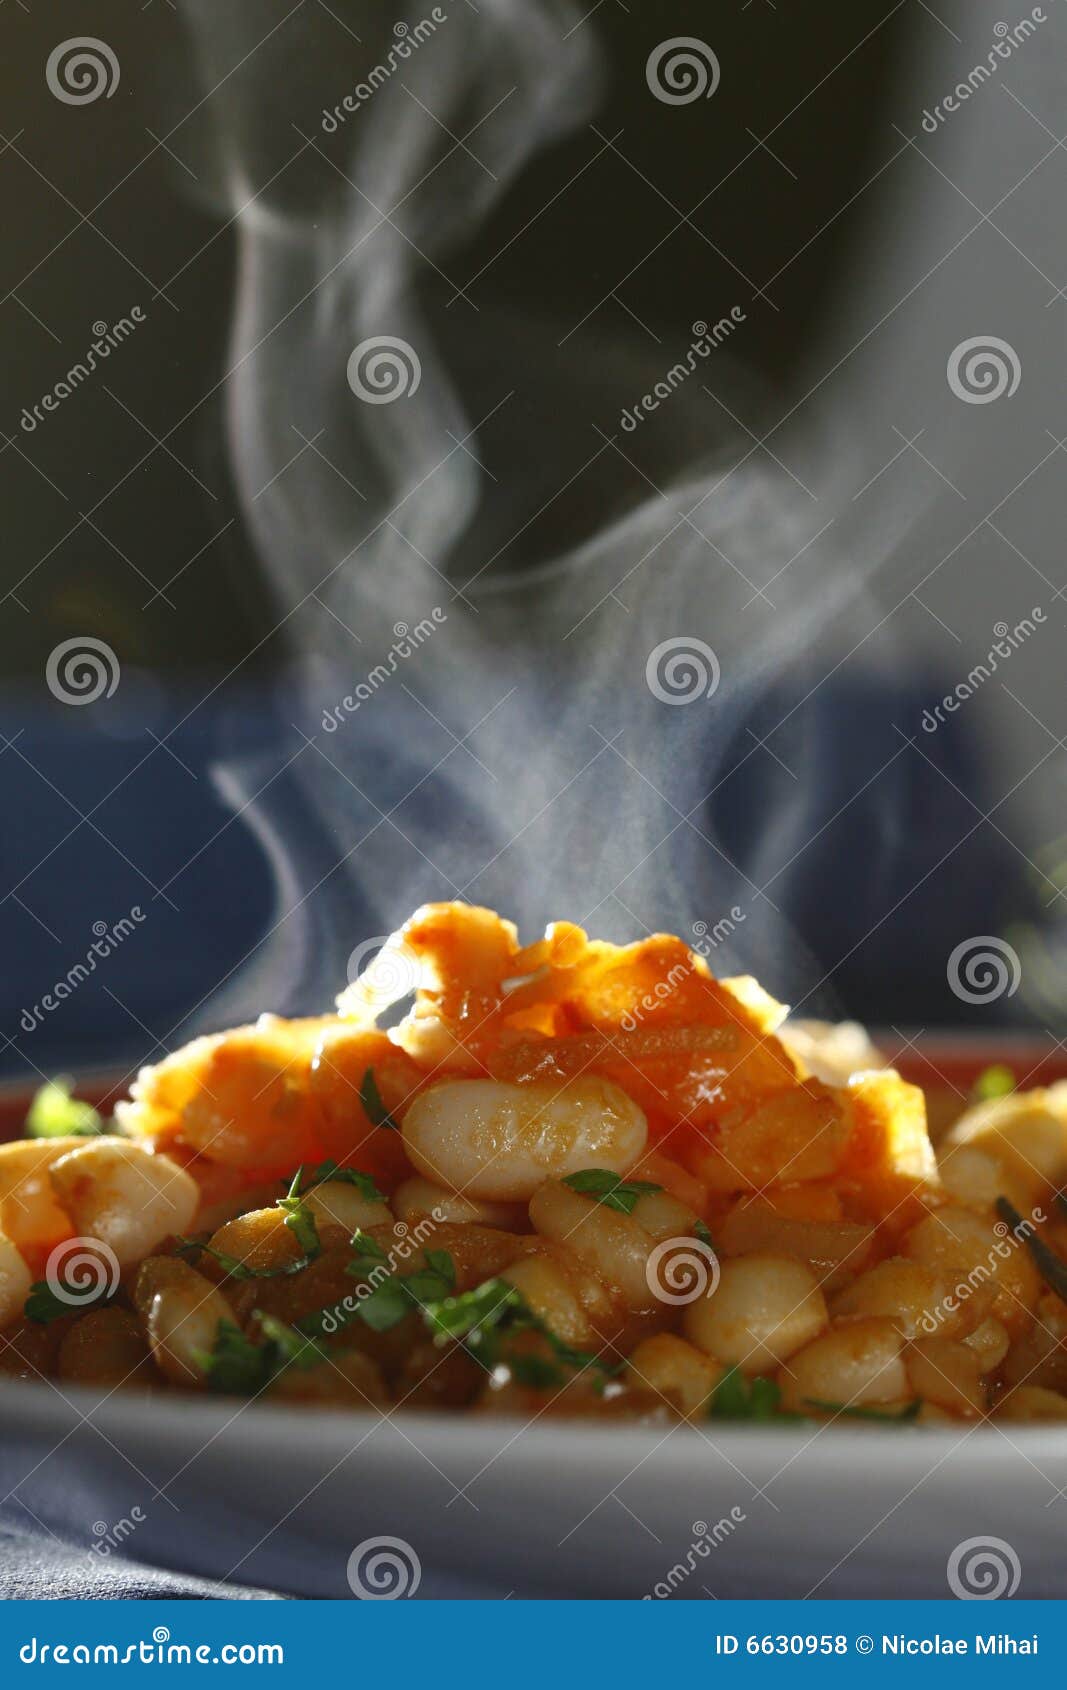 hot, steaming meal